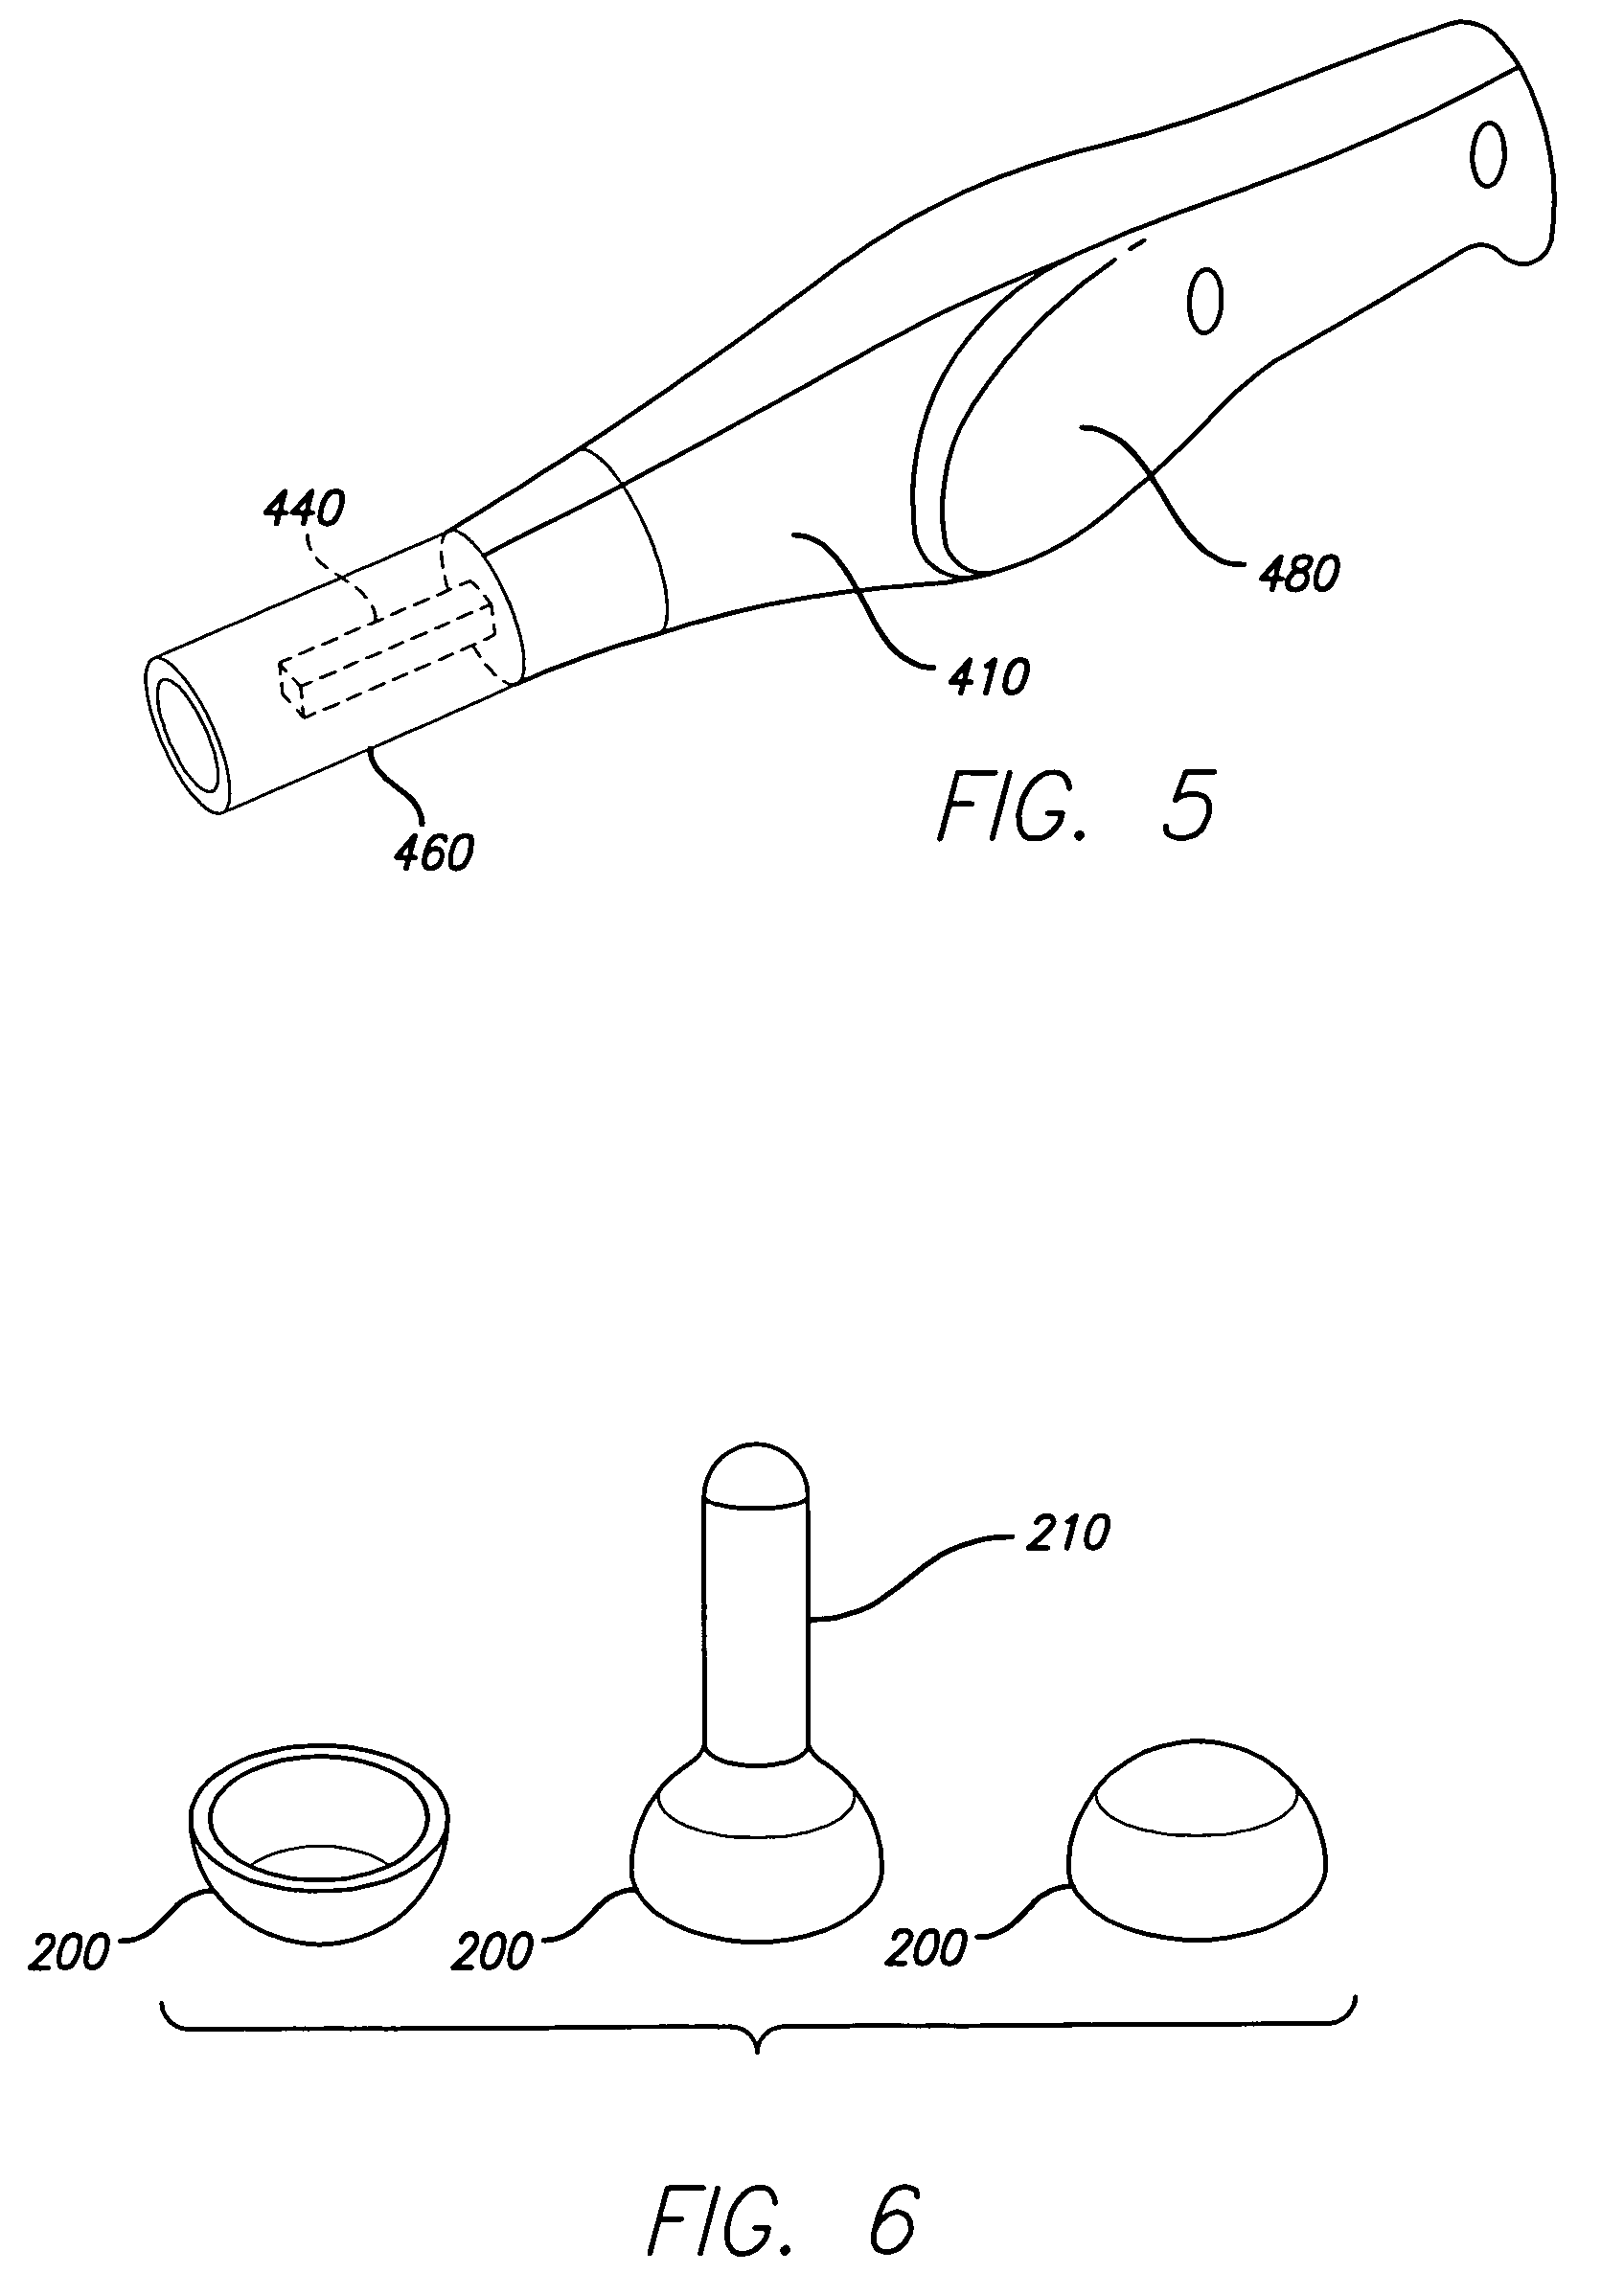 Method for using intense pulsed light to non-invasively treat conjunctival blood vessels, pigmented lesions, and other problems